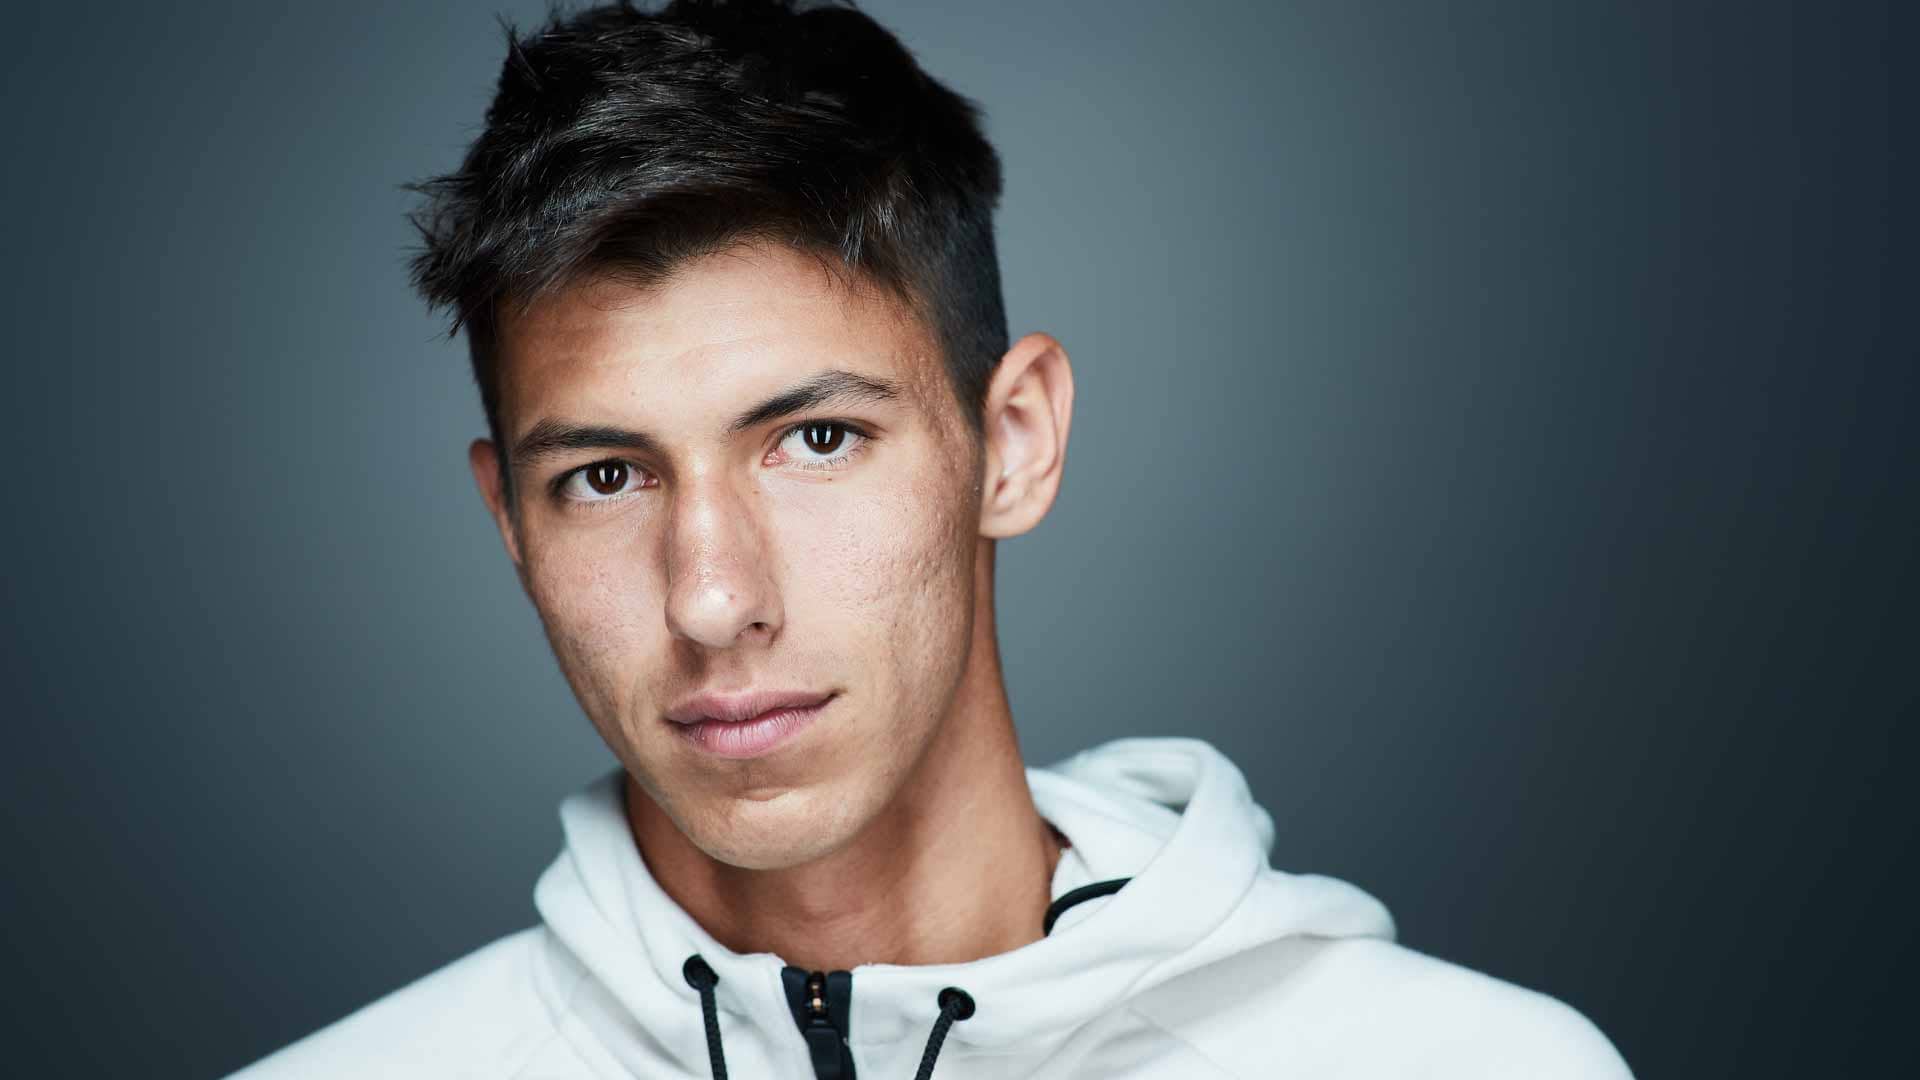 Alexei Popyrin on Thursday will try to reach the third round of a Grand Slam for the second time.